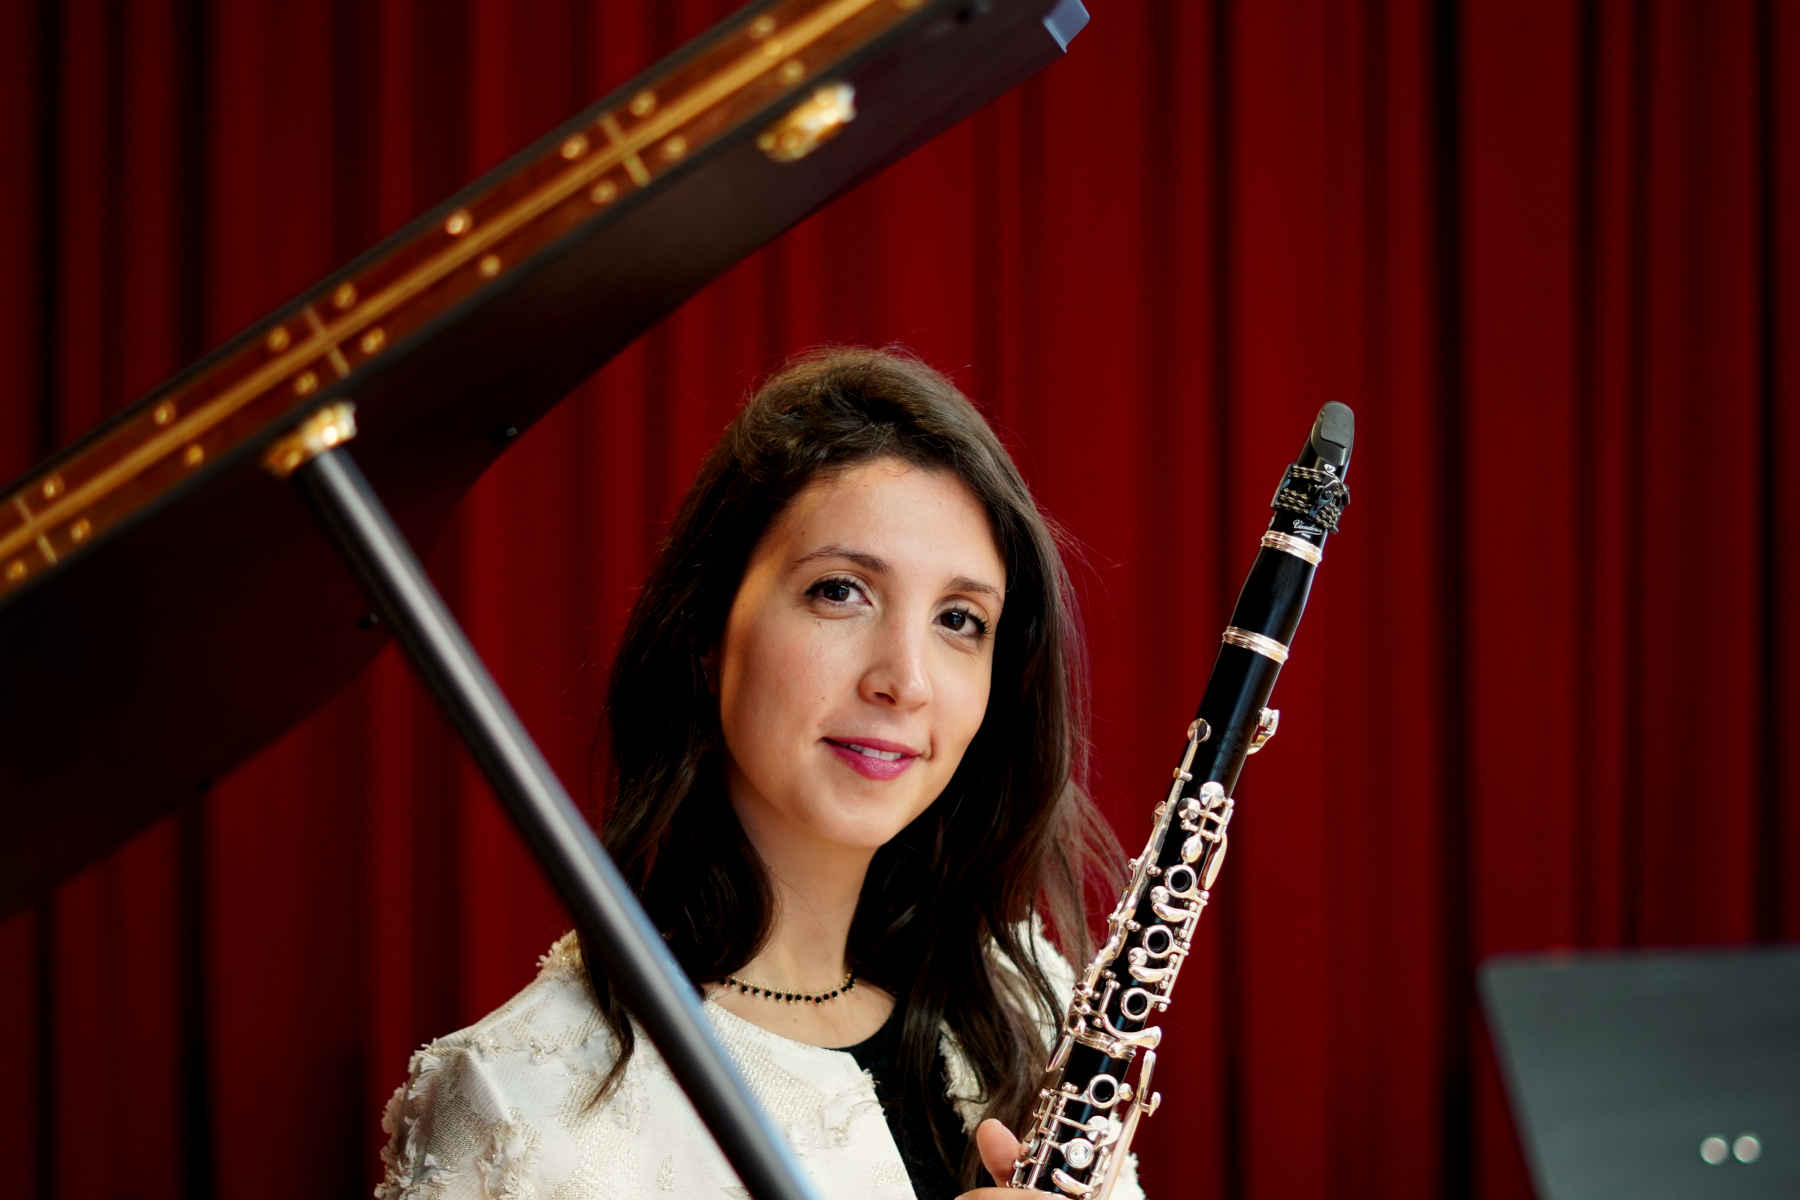 Learning to play the Clarinet – 20 questions for Flavia Feudi